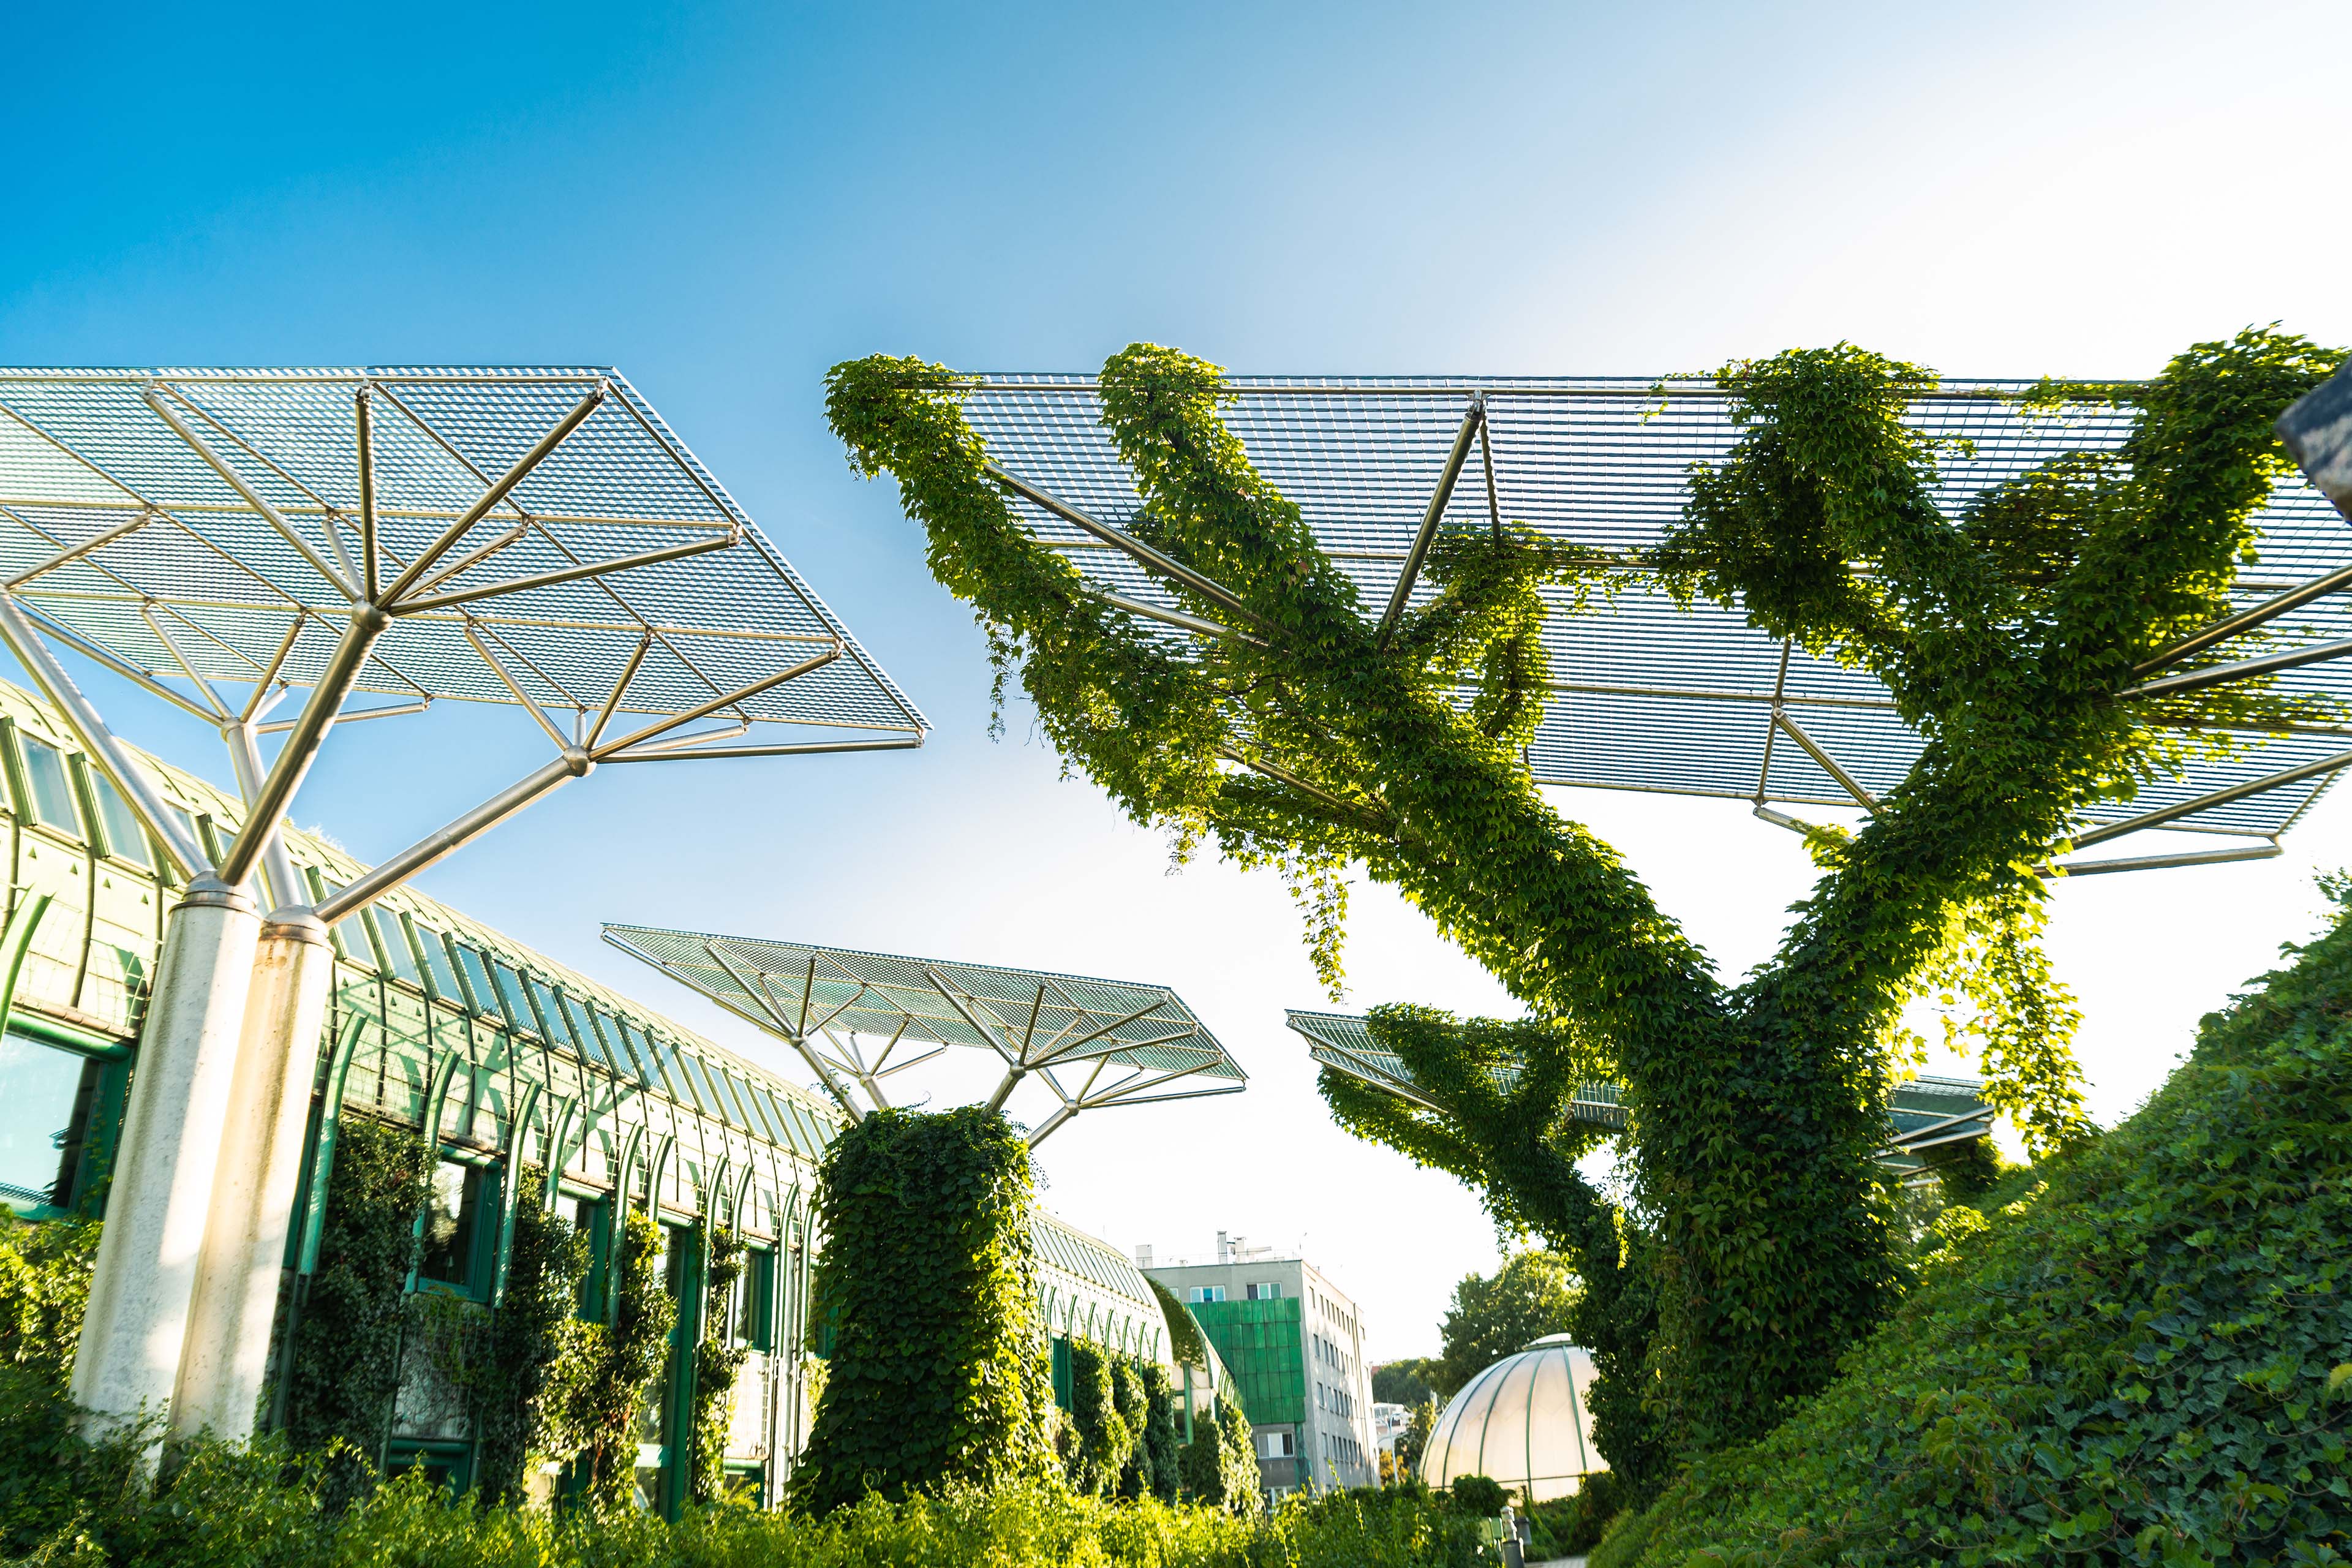 ey-eco-energy-garden-with-solar-pannels